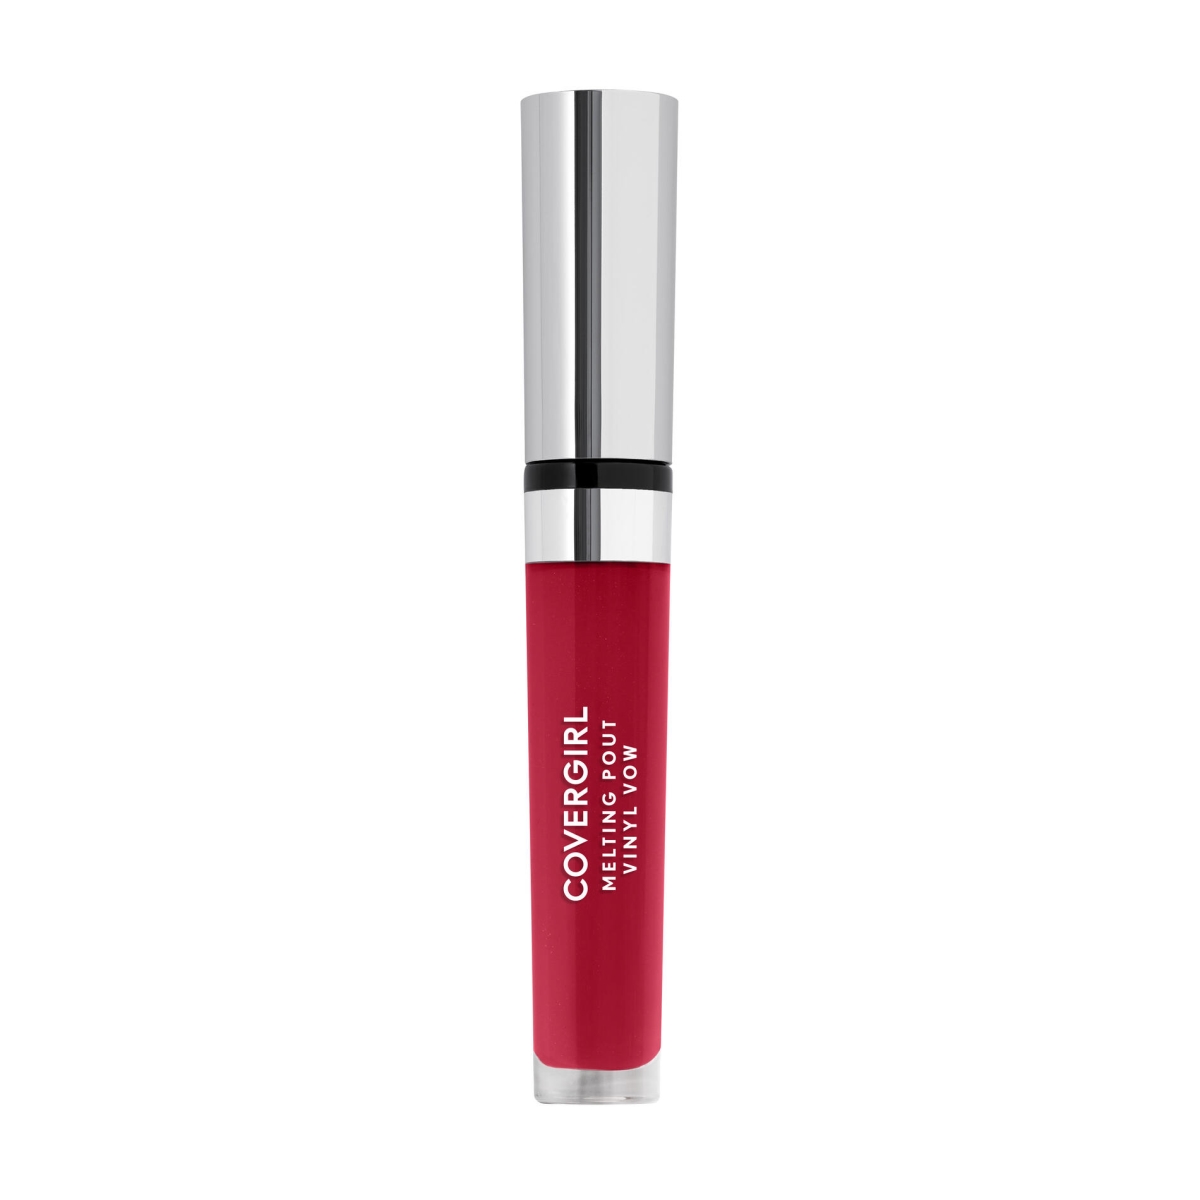 8291640 Melting Pout Vinyl Vow Liquid Lipstick, 225 Keep It Going - Pack Of 2